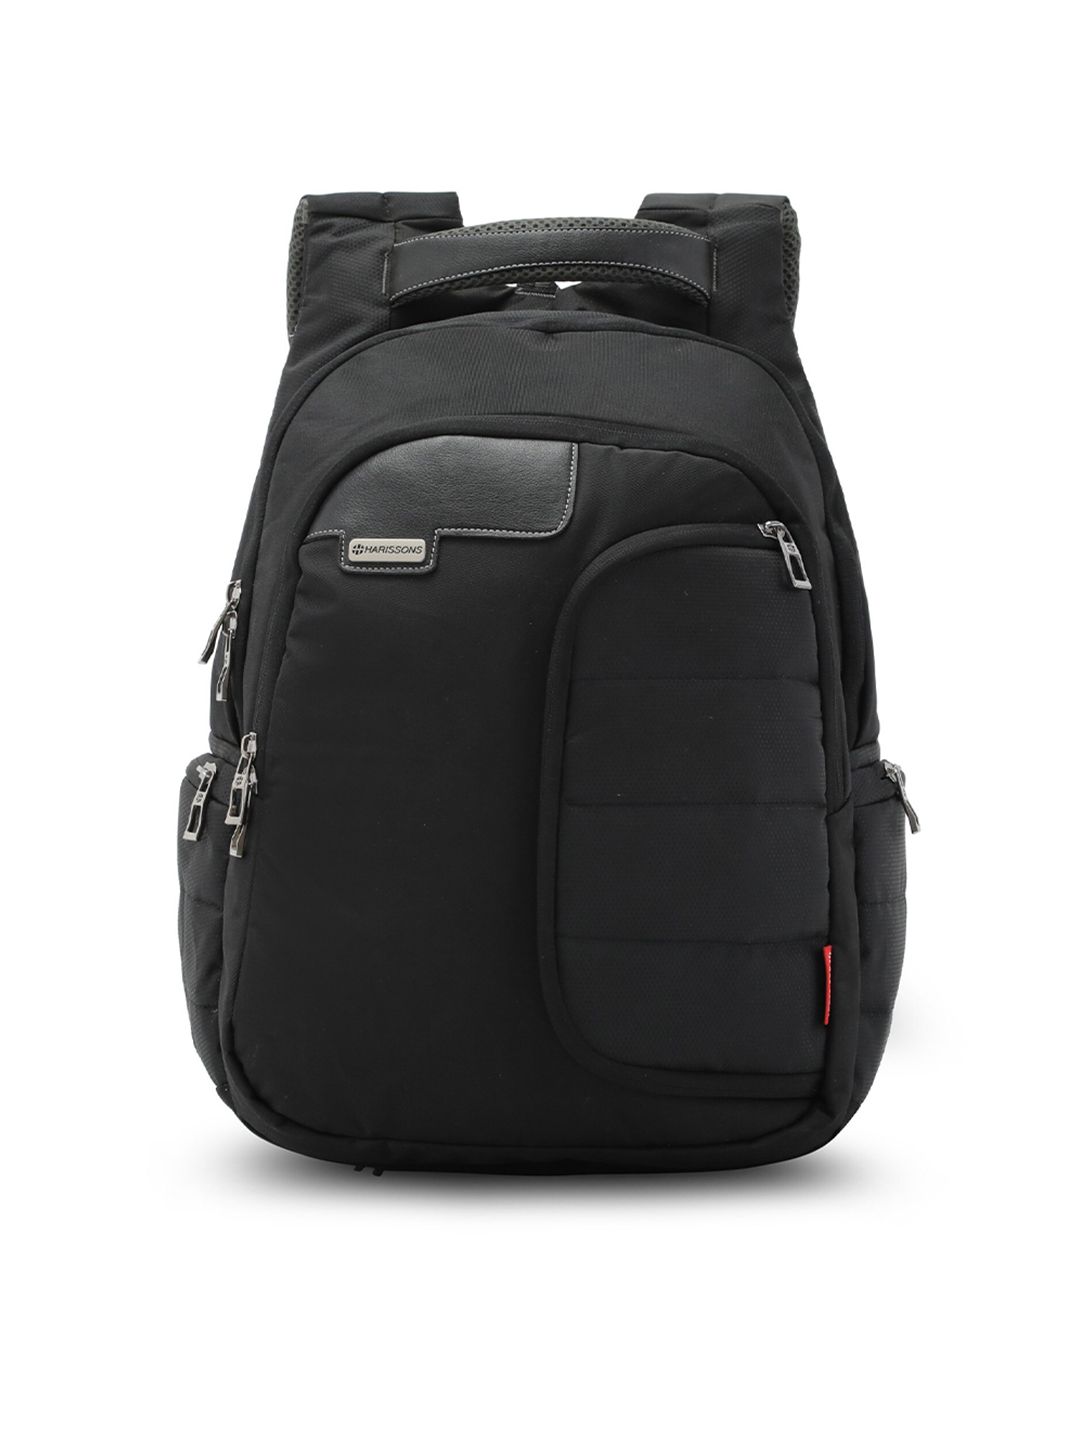 Harissons Unisex Black Laptop Backpack Price in India